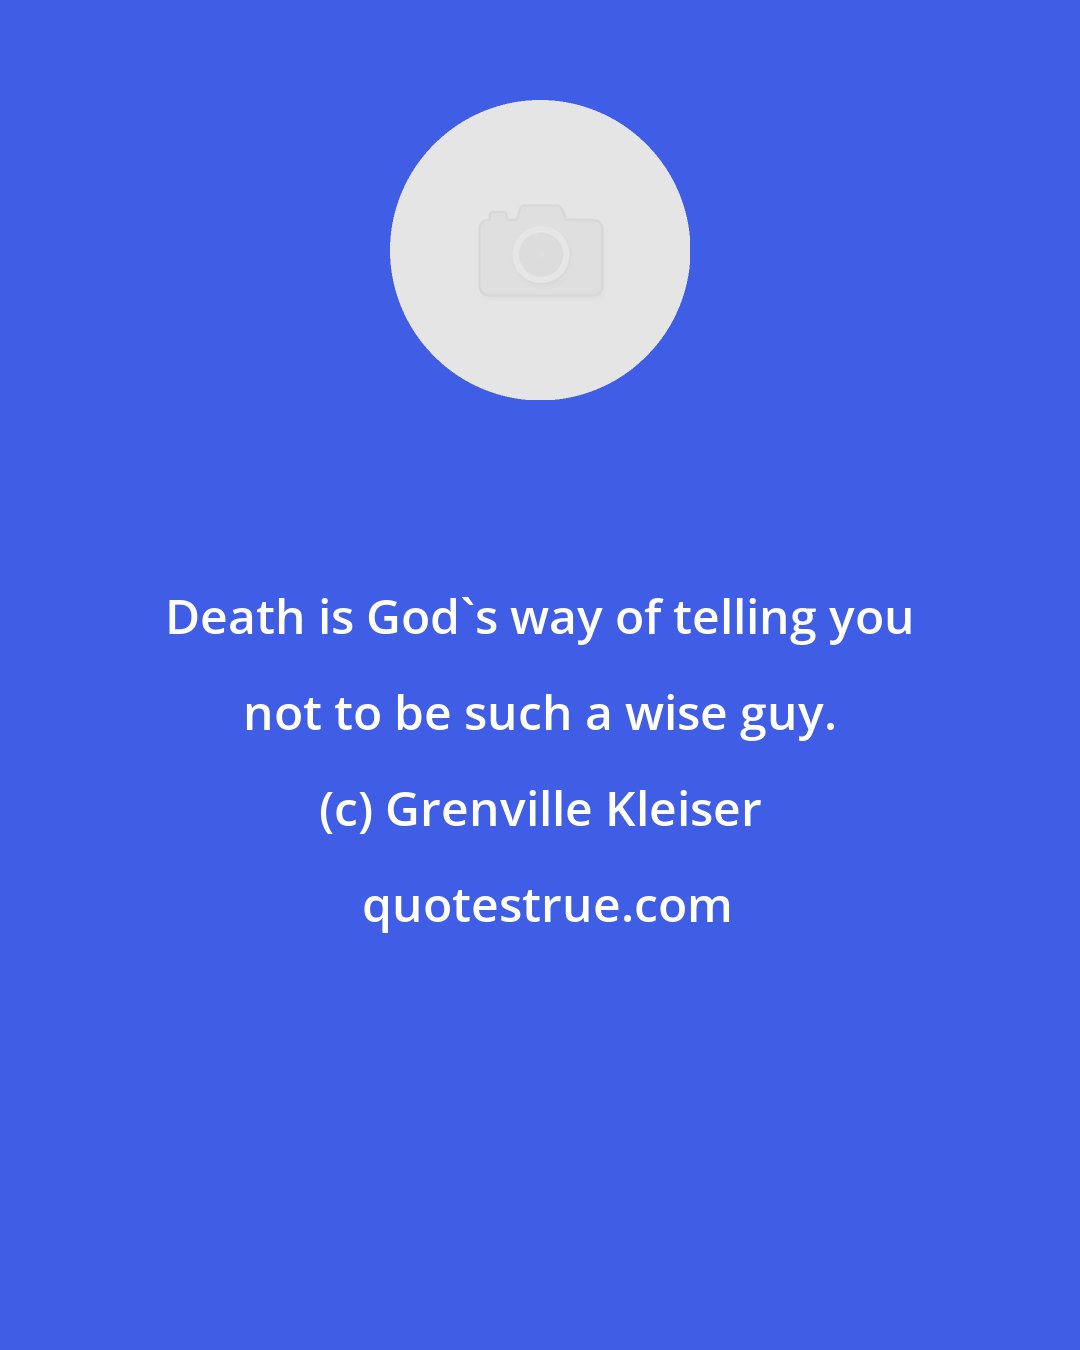 Grenville Kleiser: Death is God's way of telling you not to be such a wise guy.